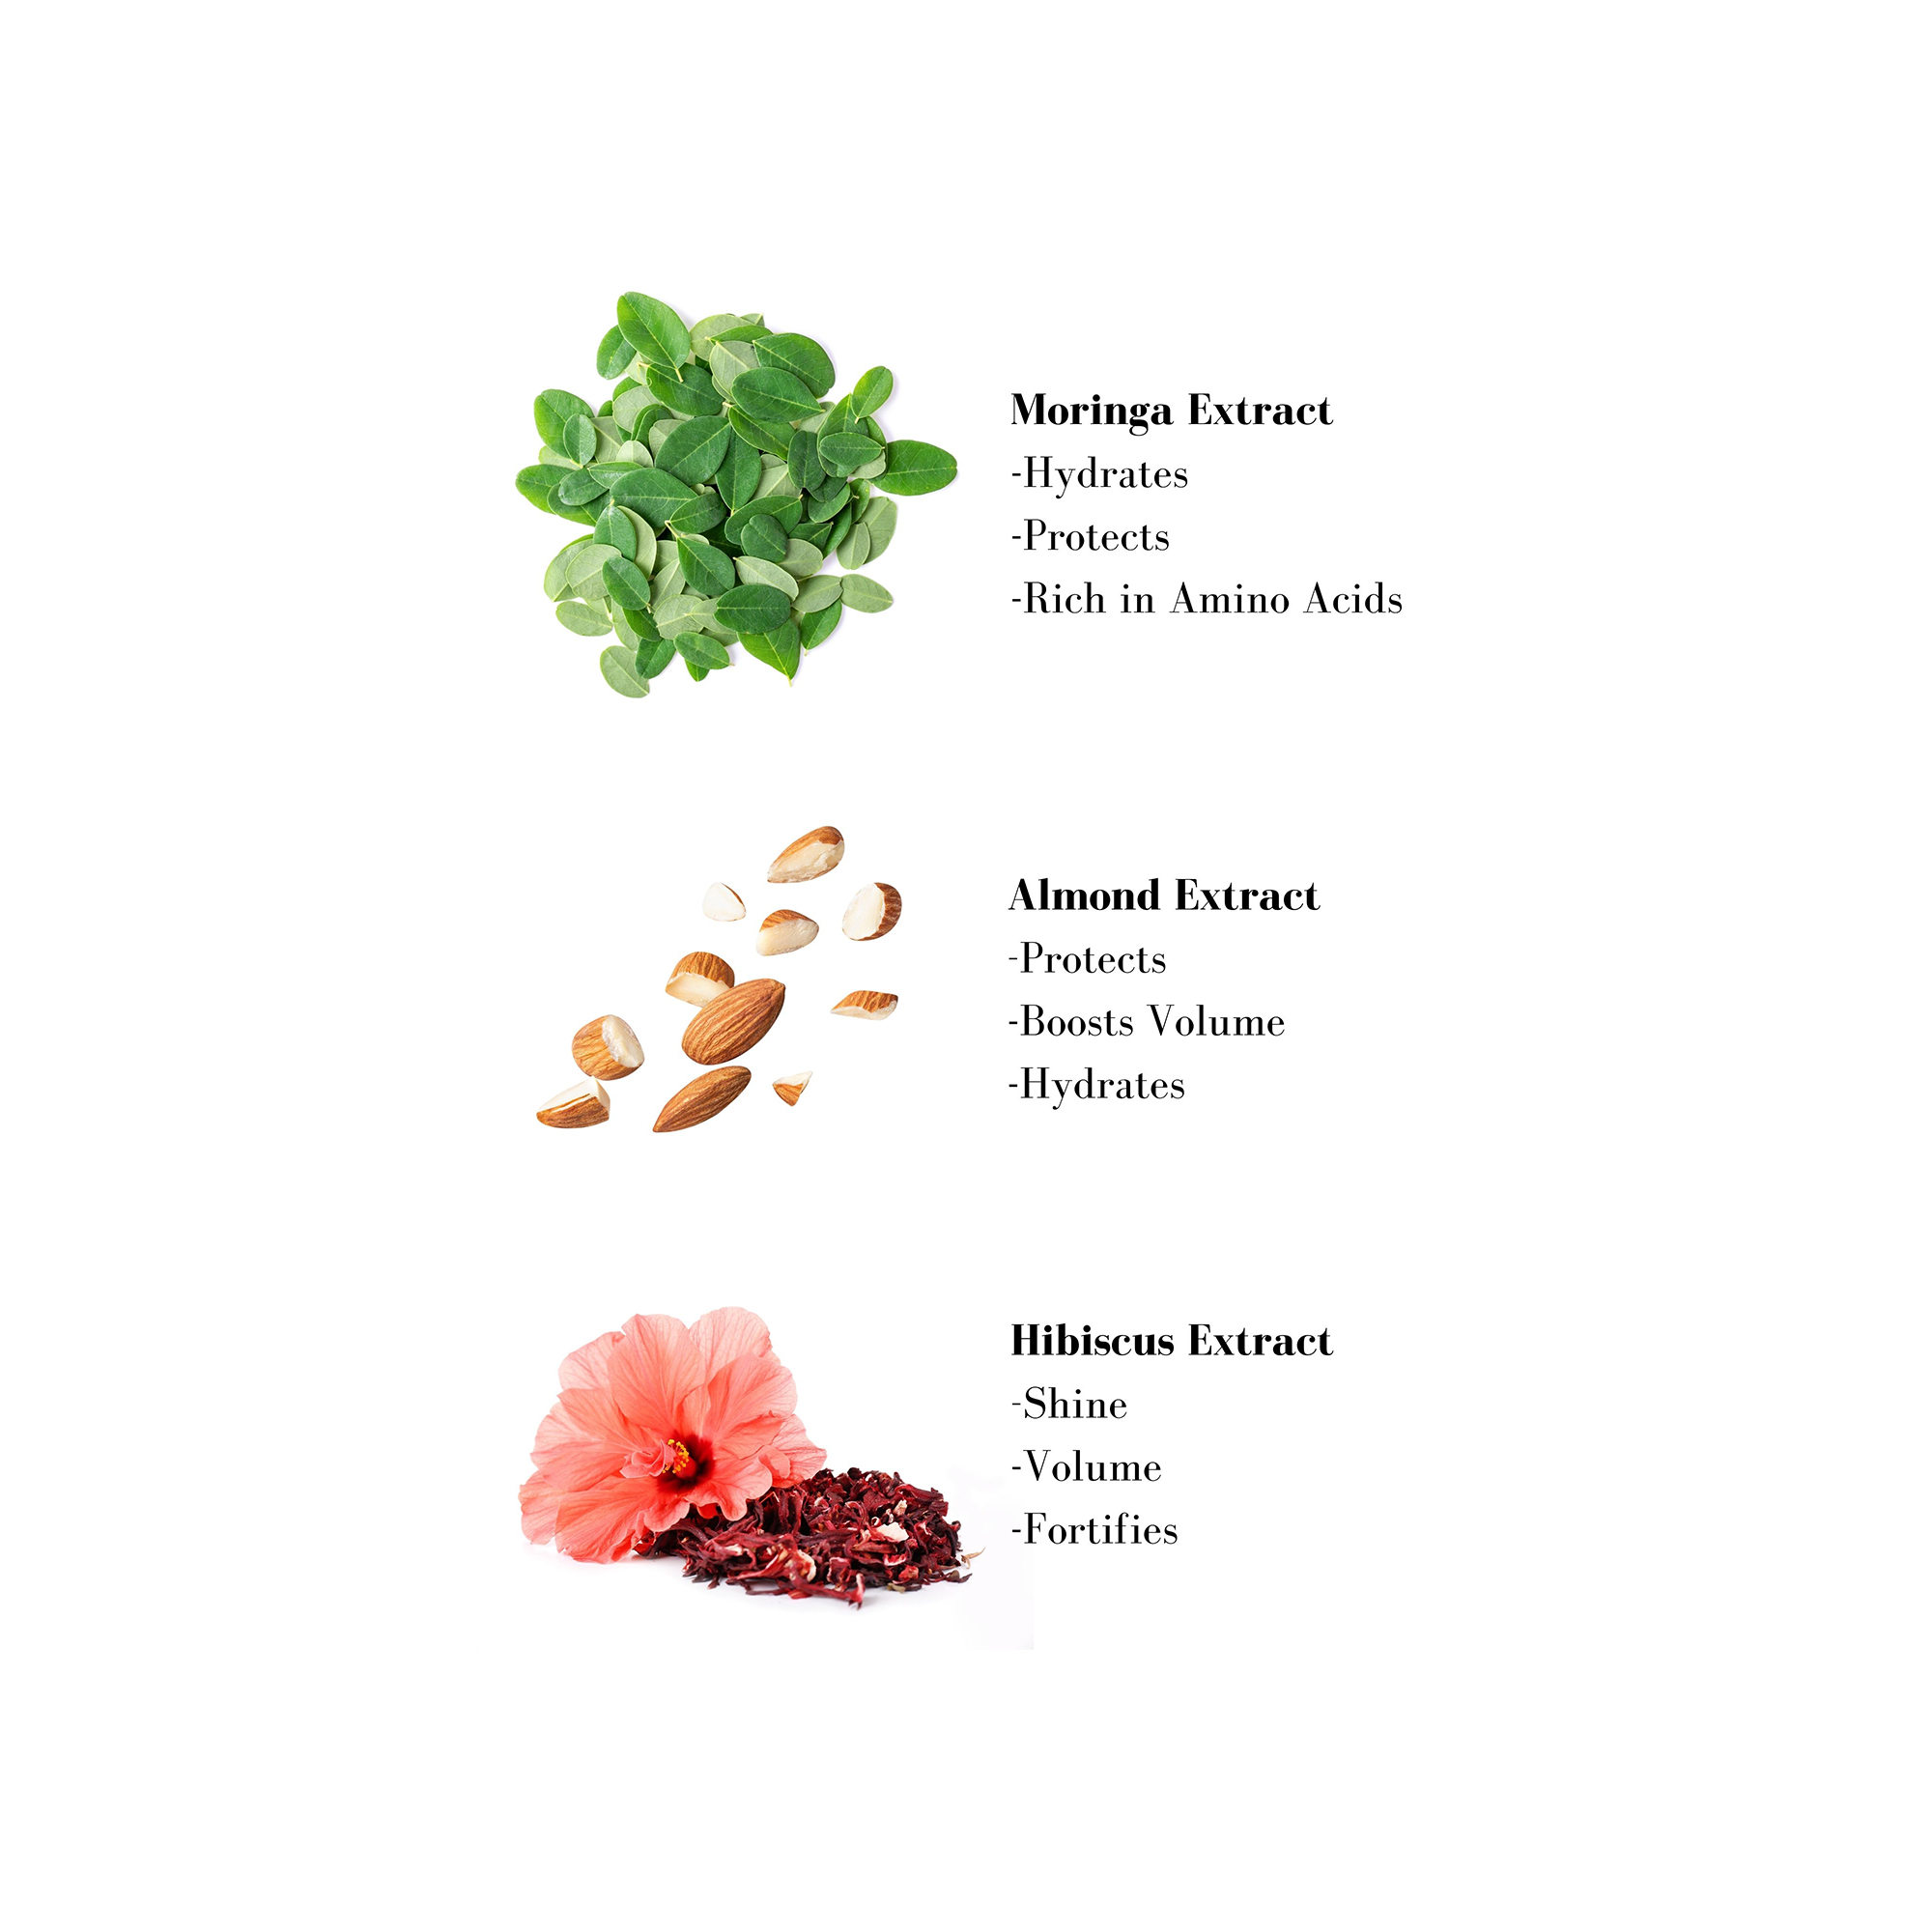 Image 1- Moringa Extract -Hydrates -Protects -Rich in Amino Acids Almond Extract -Protects -Boosts Volume -Hydrates Hibiscus Extract -Shine - Volume -Fortifies